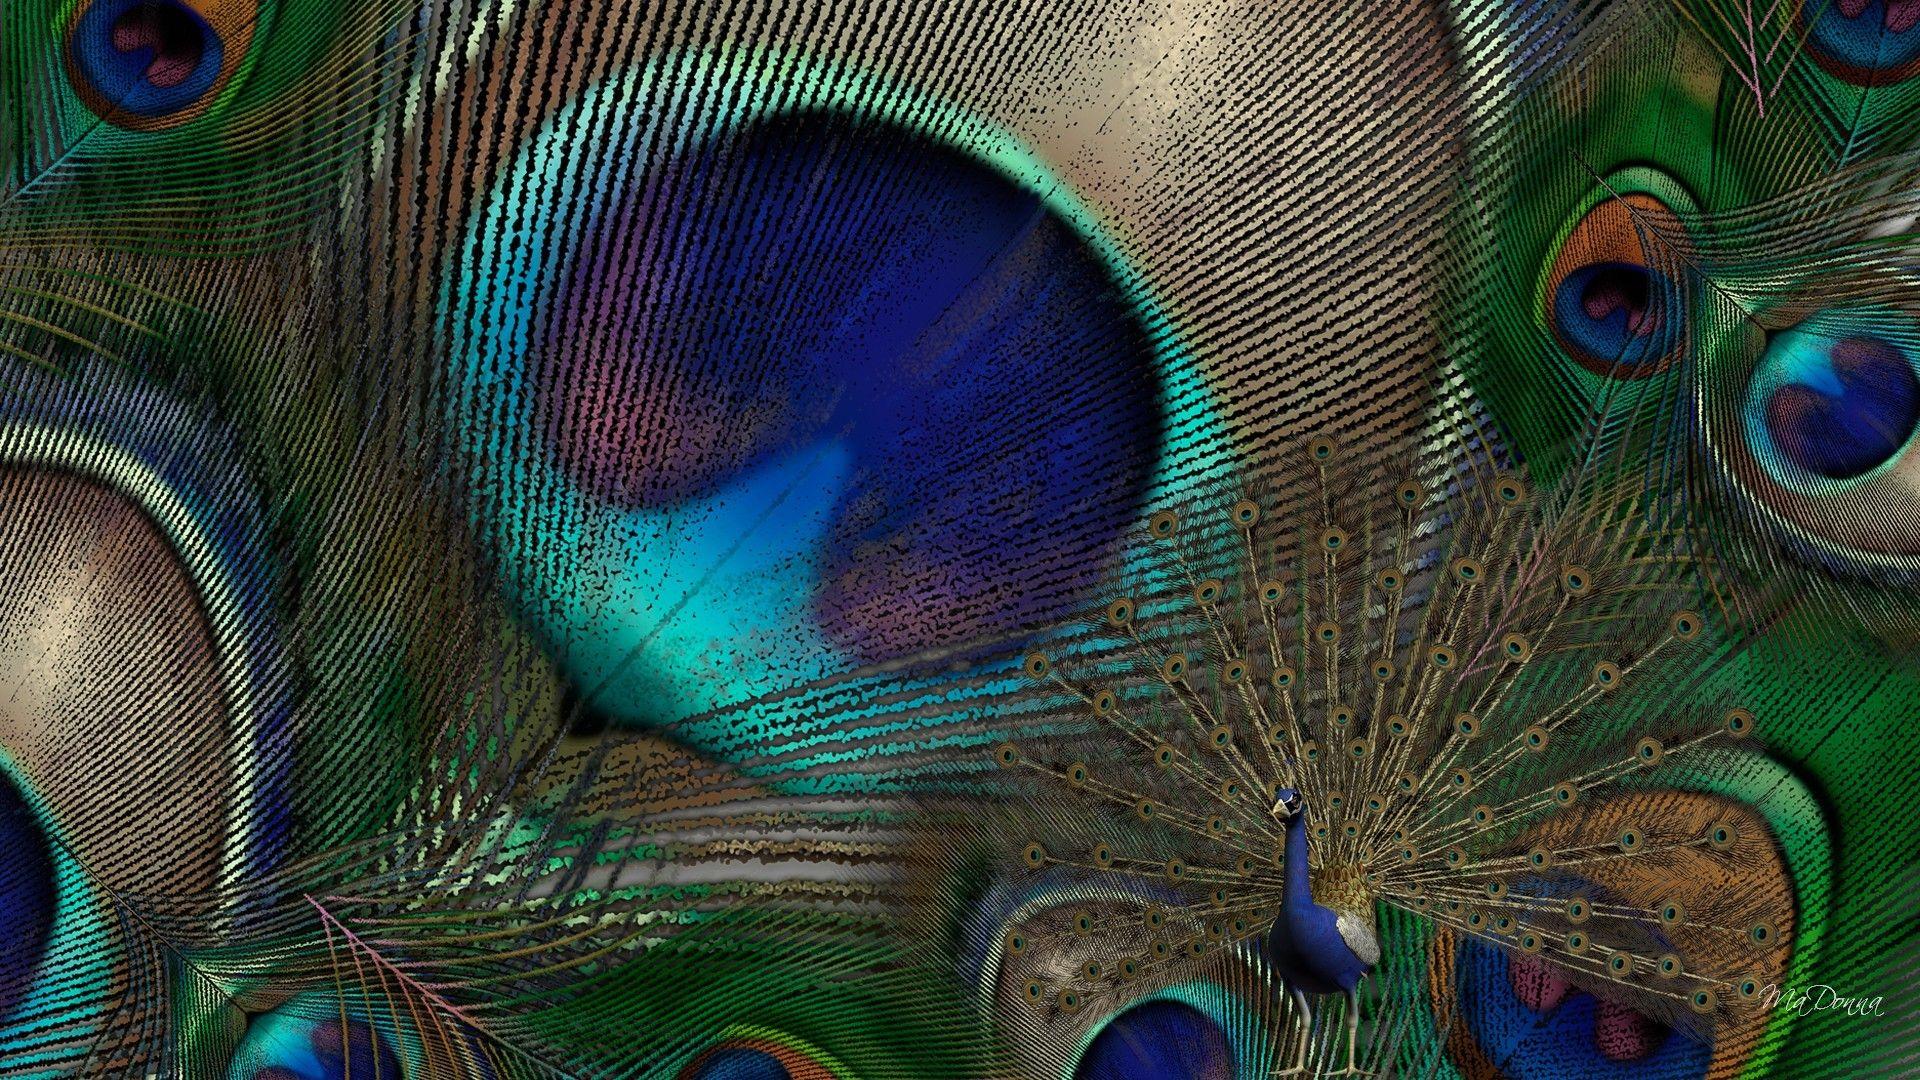 Wallpaper of Peacock Feathers HD 2018